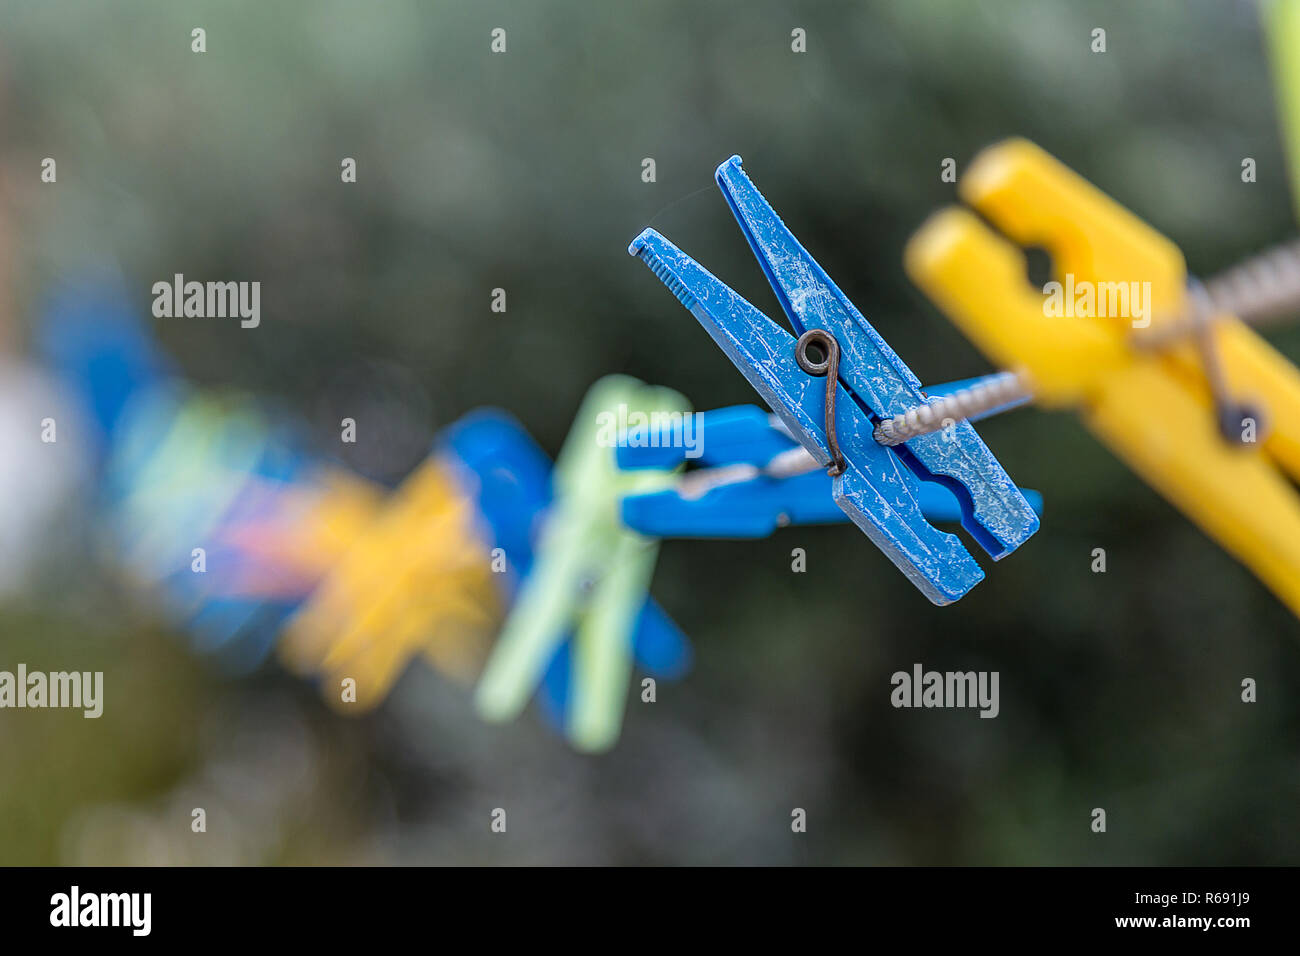 Blurred Plastic Clothes Peg's on a Rope Stock Photo